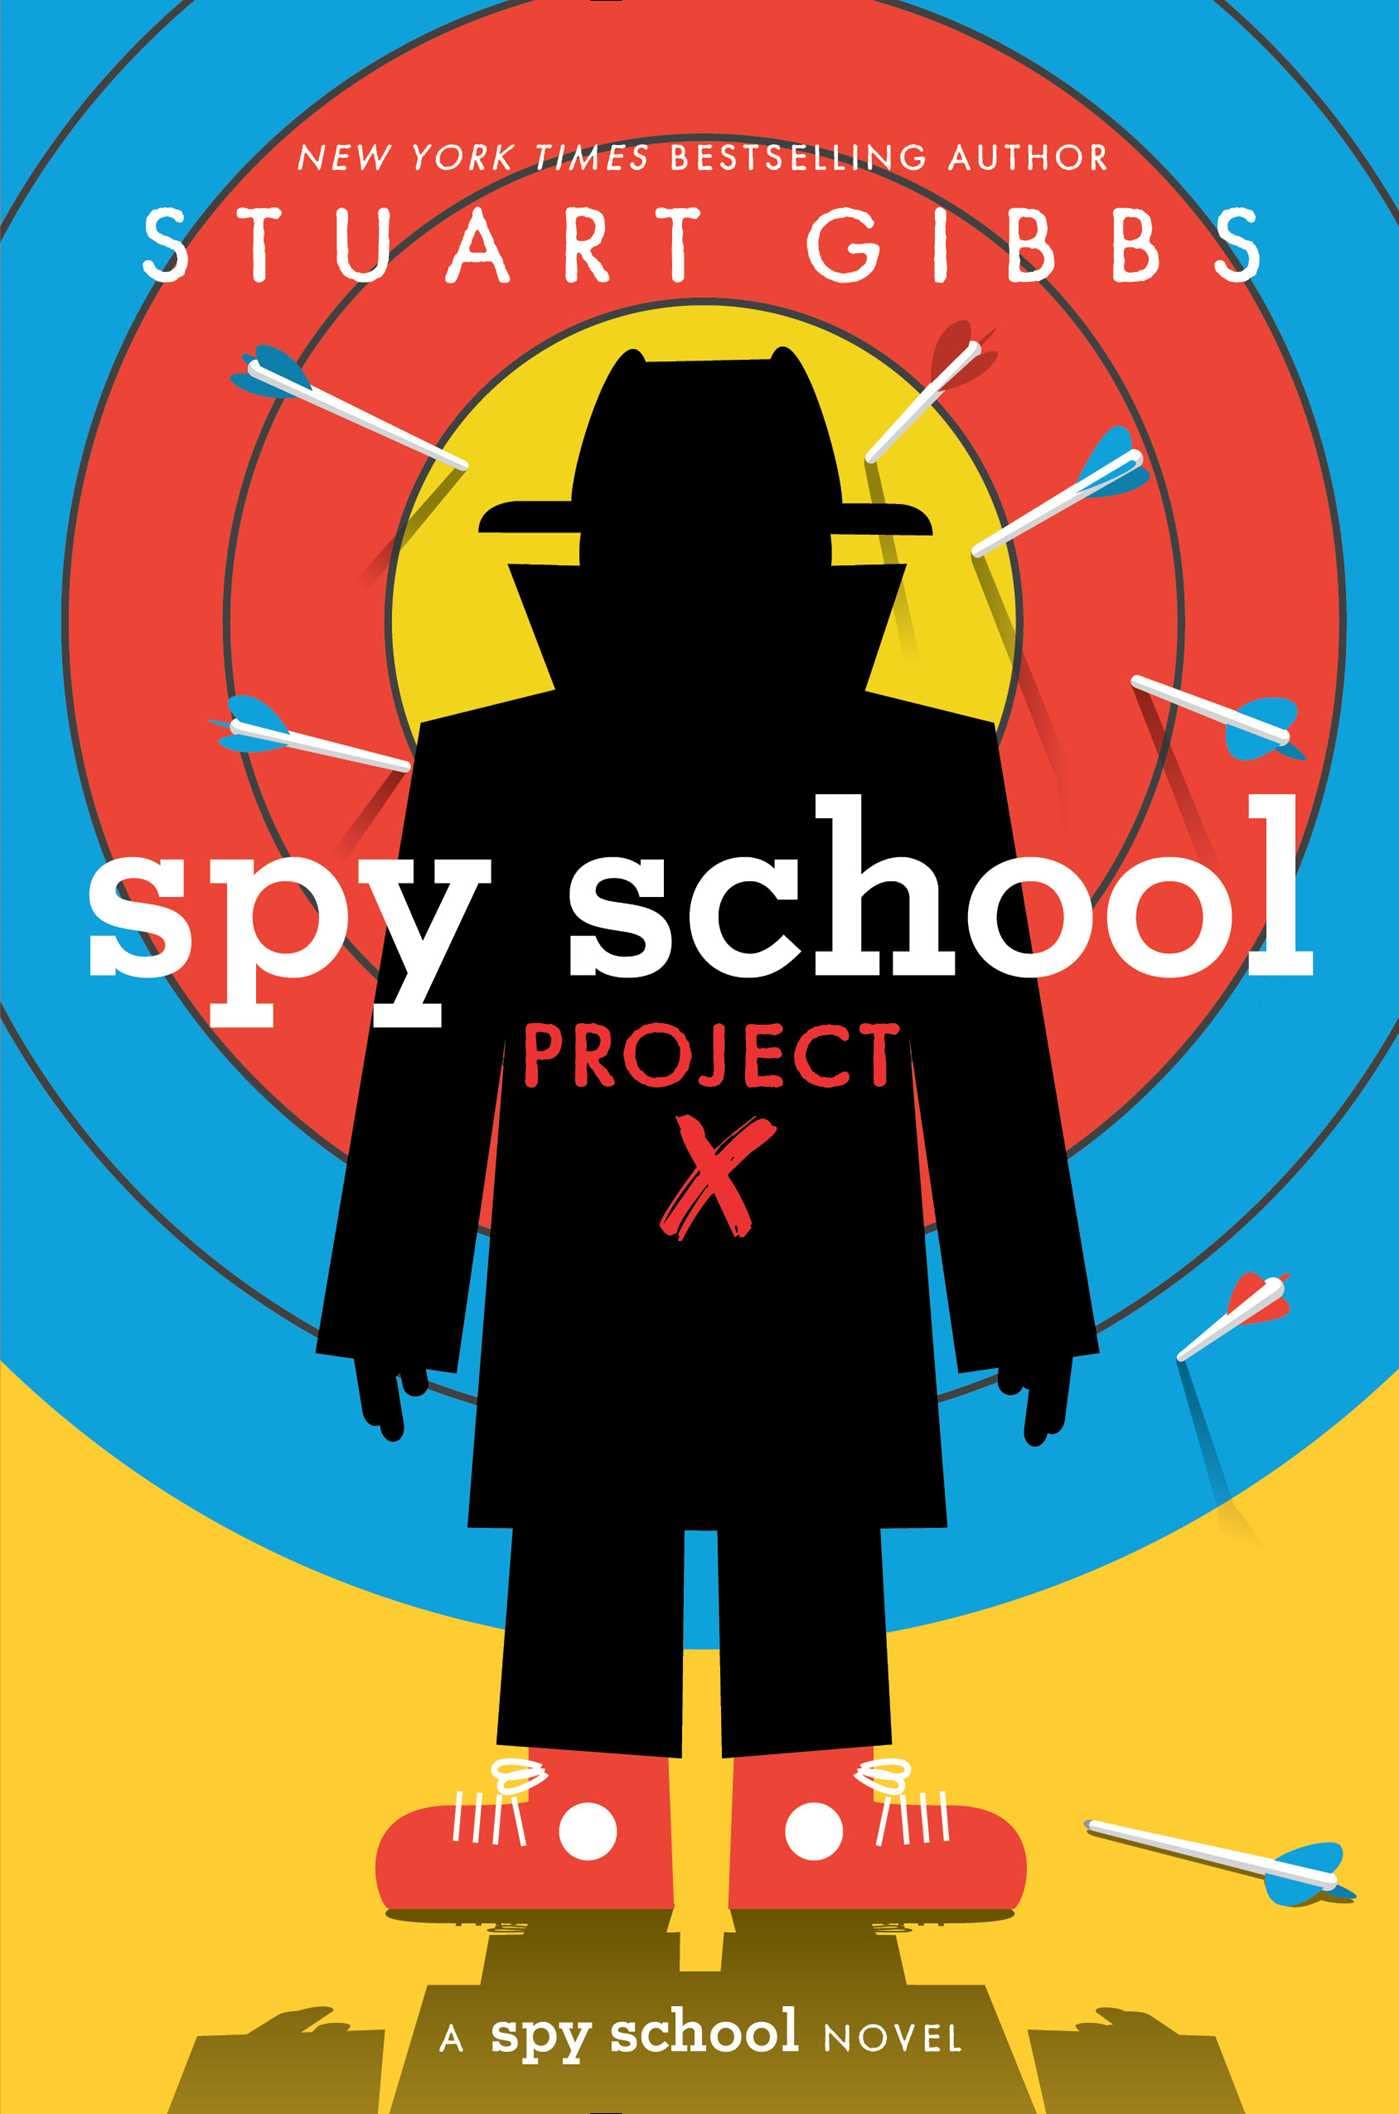 spy school project x book review